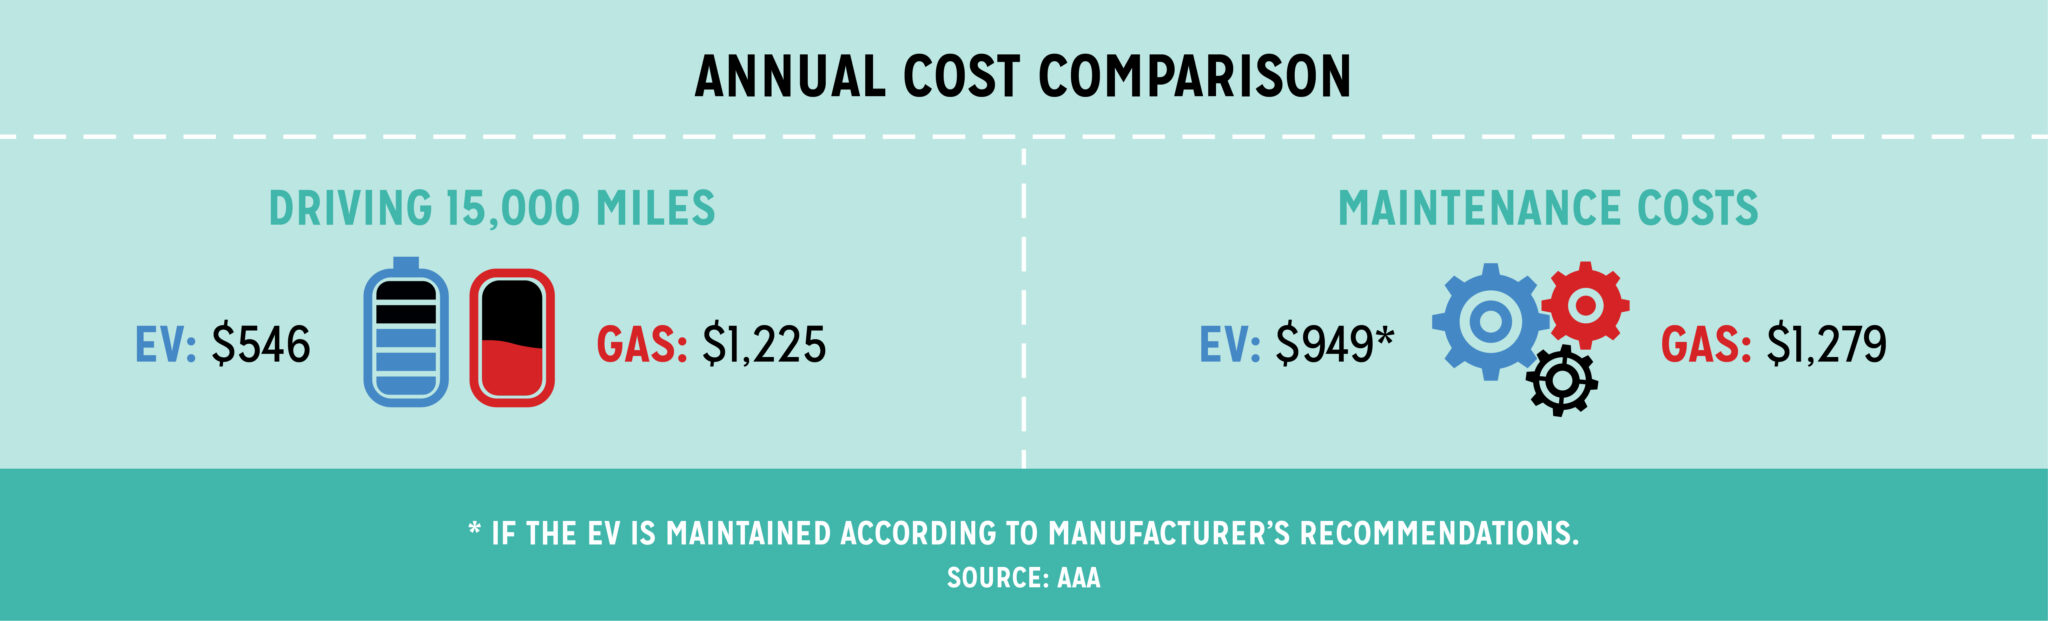 Infographic comparing the annual costs of mileage and maintenance between an electric vehicle and a gas-powered vehicle